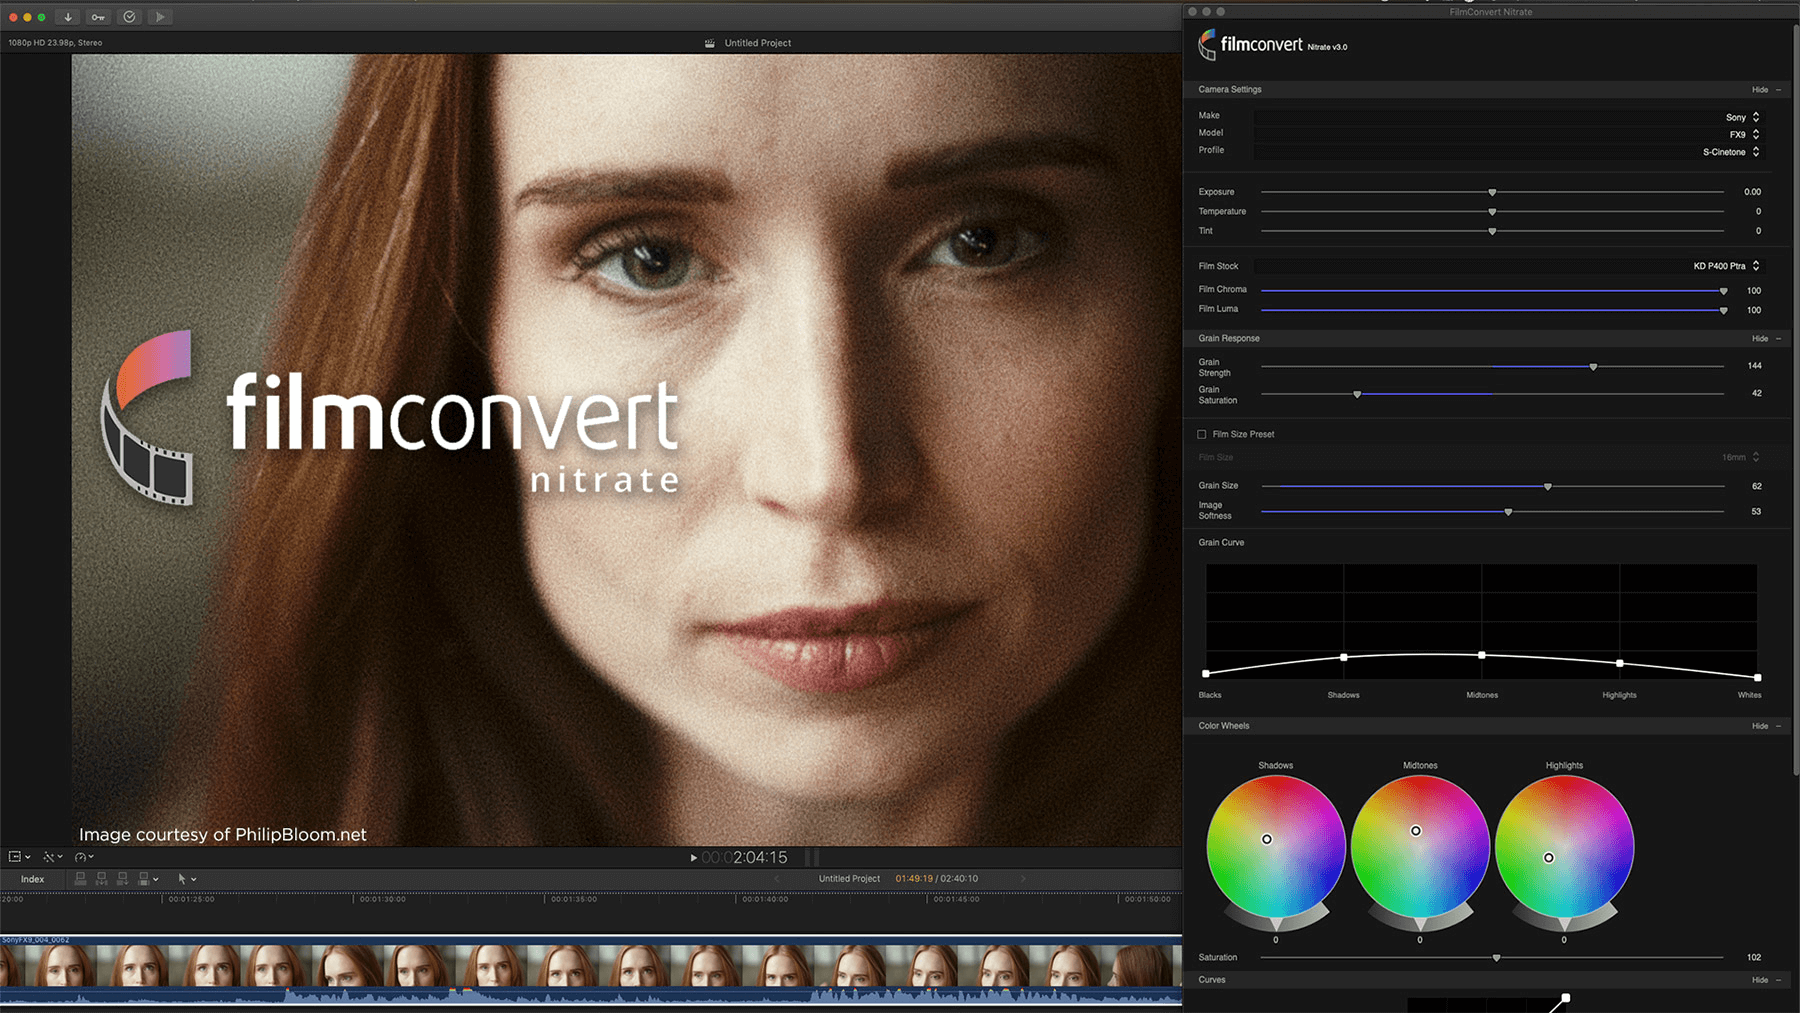 FilmConvert Nitrate Full Preactivated